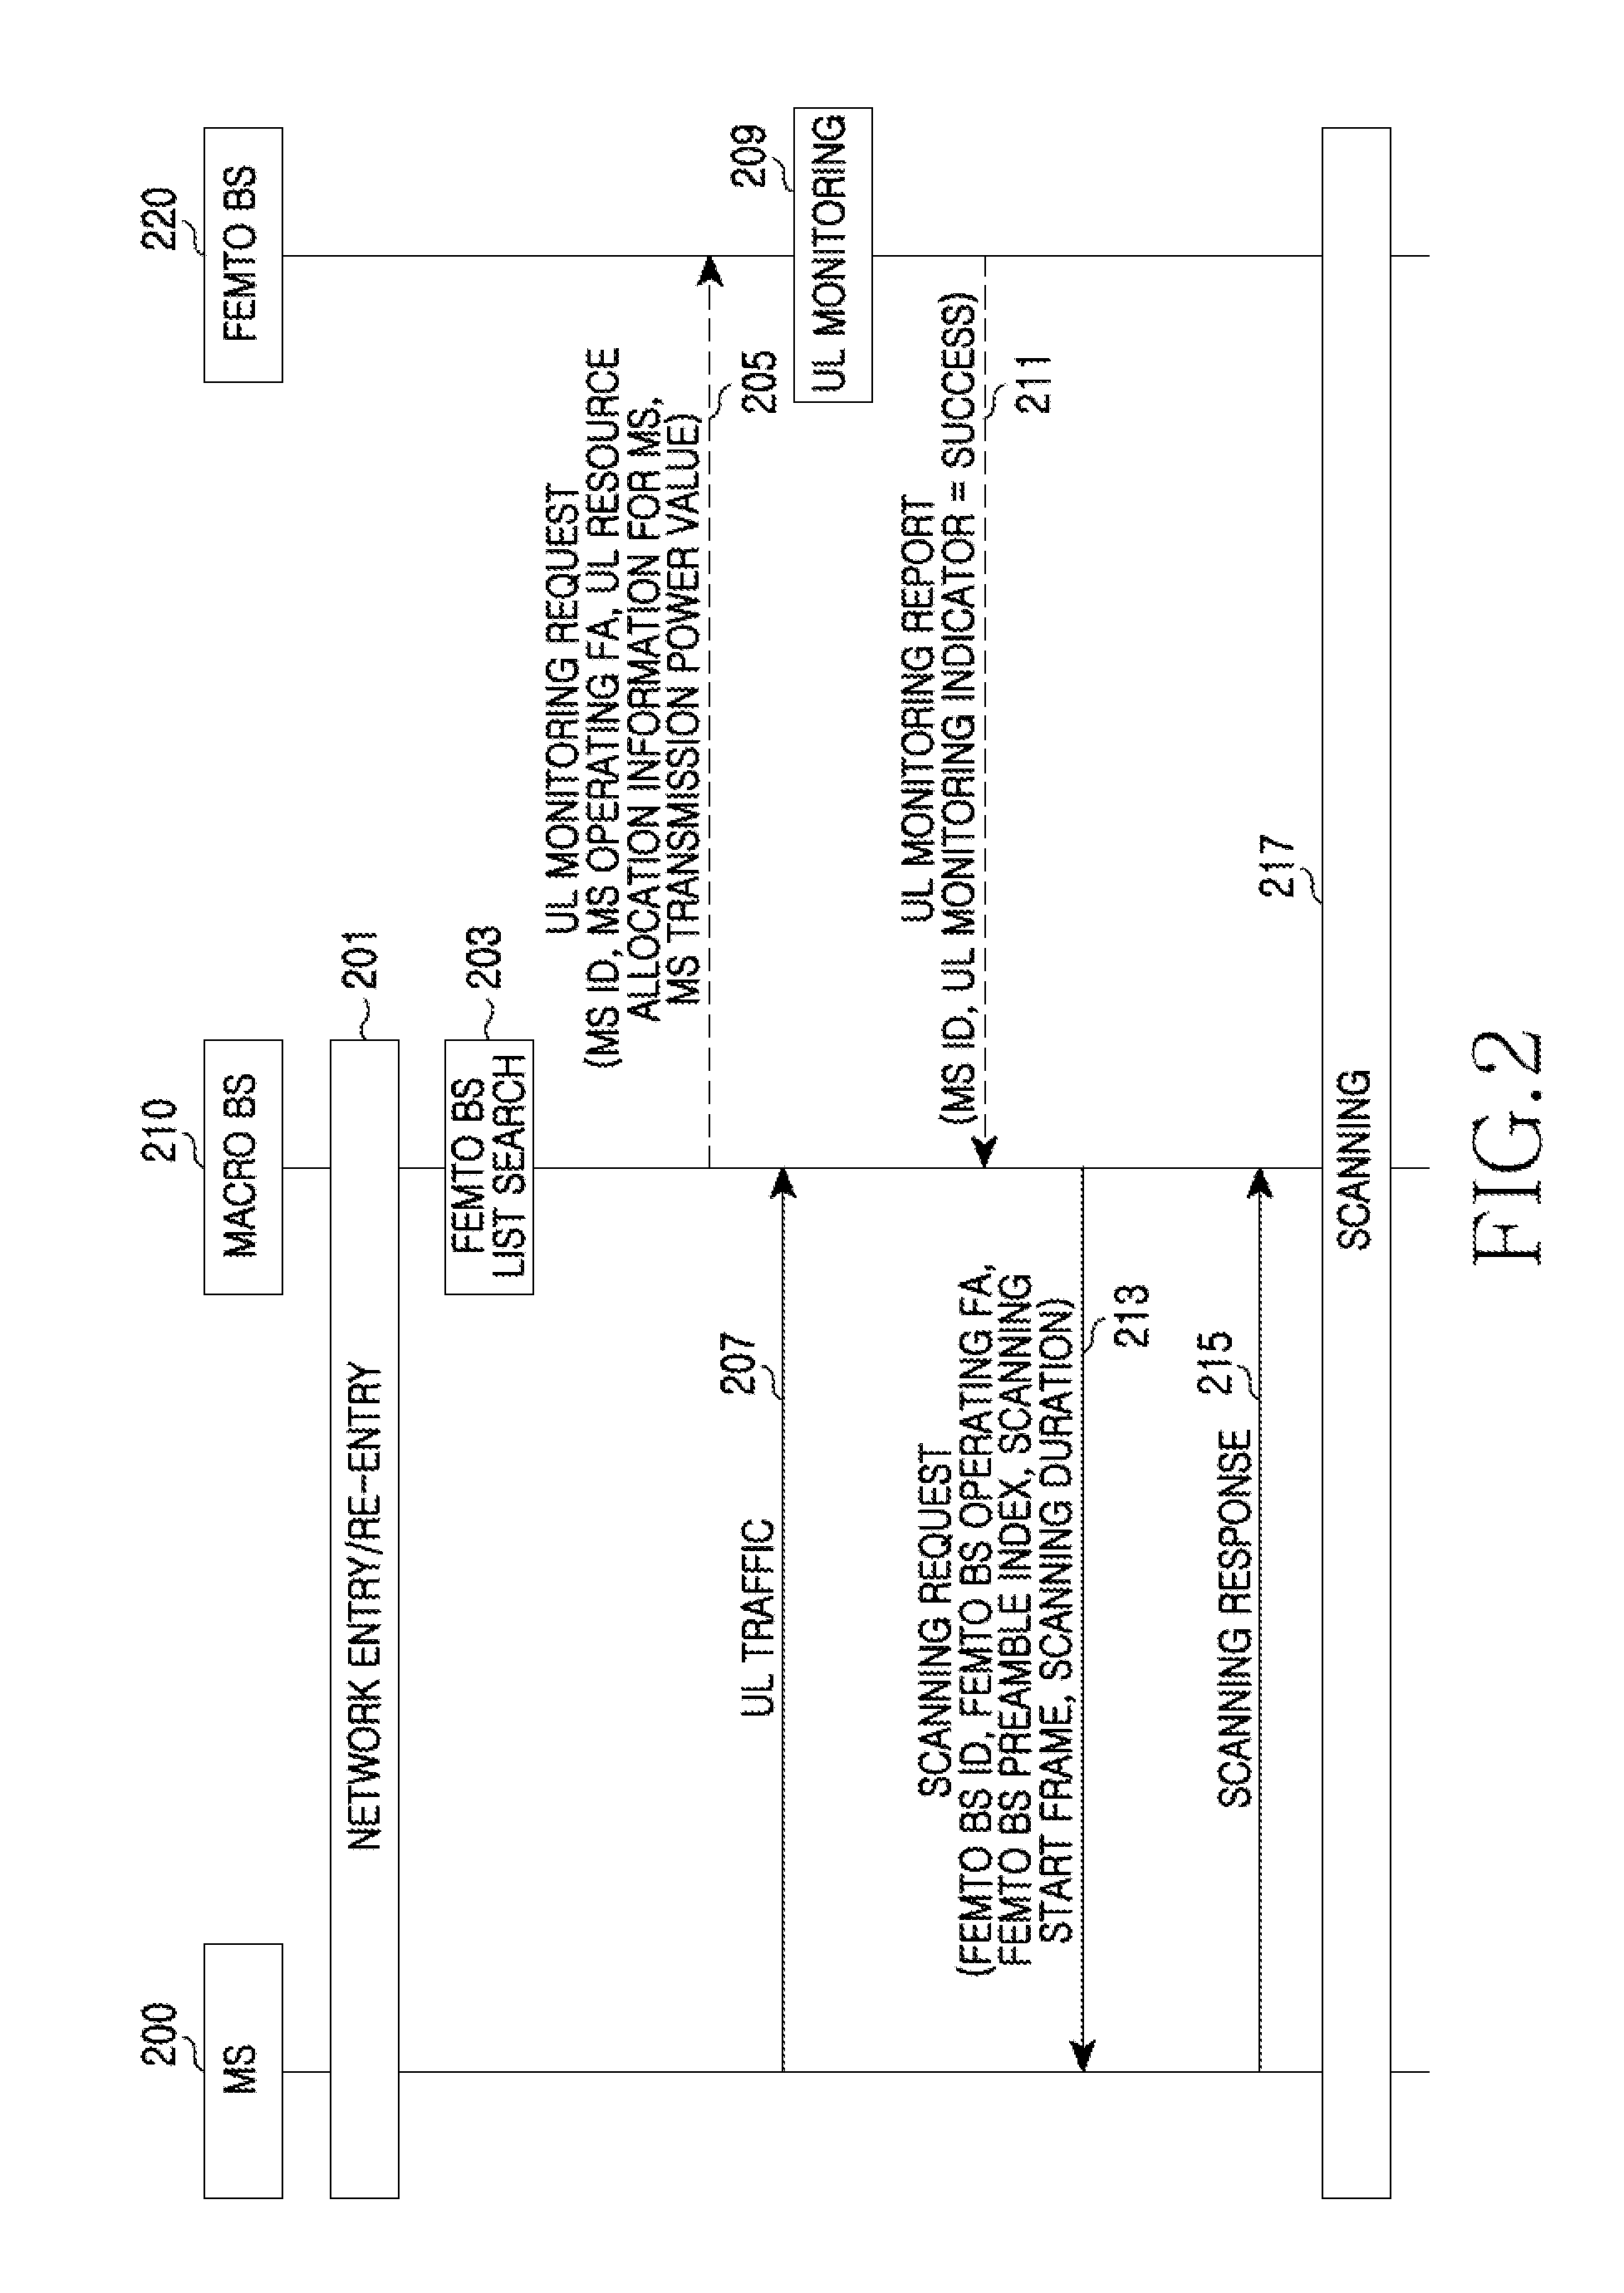 Apparatus and method for detecting femto base station in wireless communication system